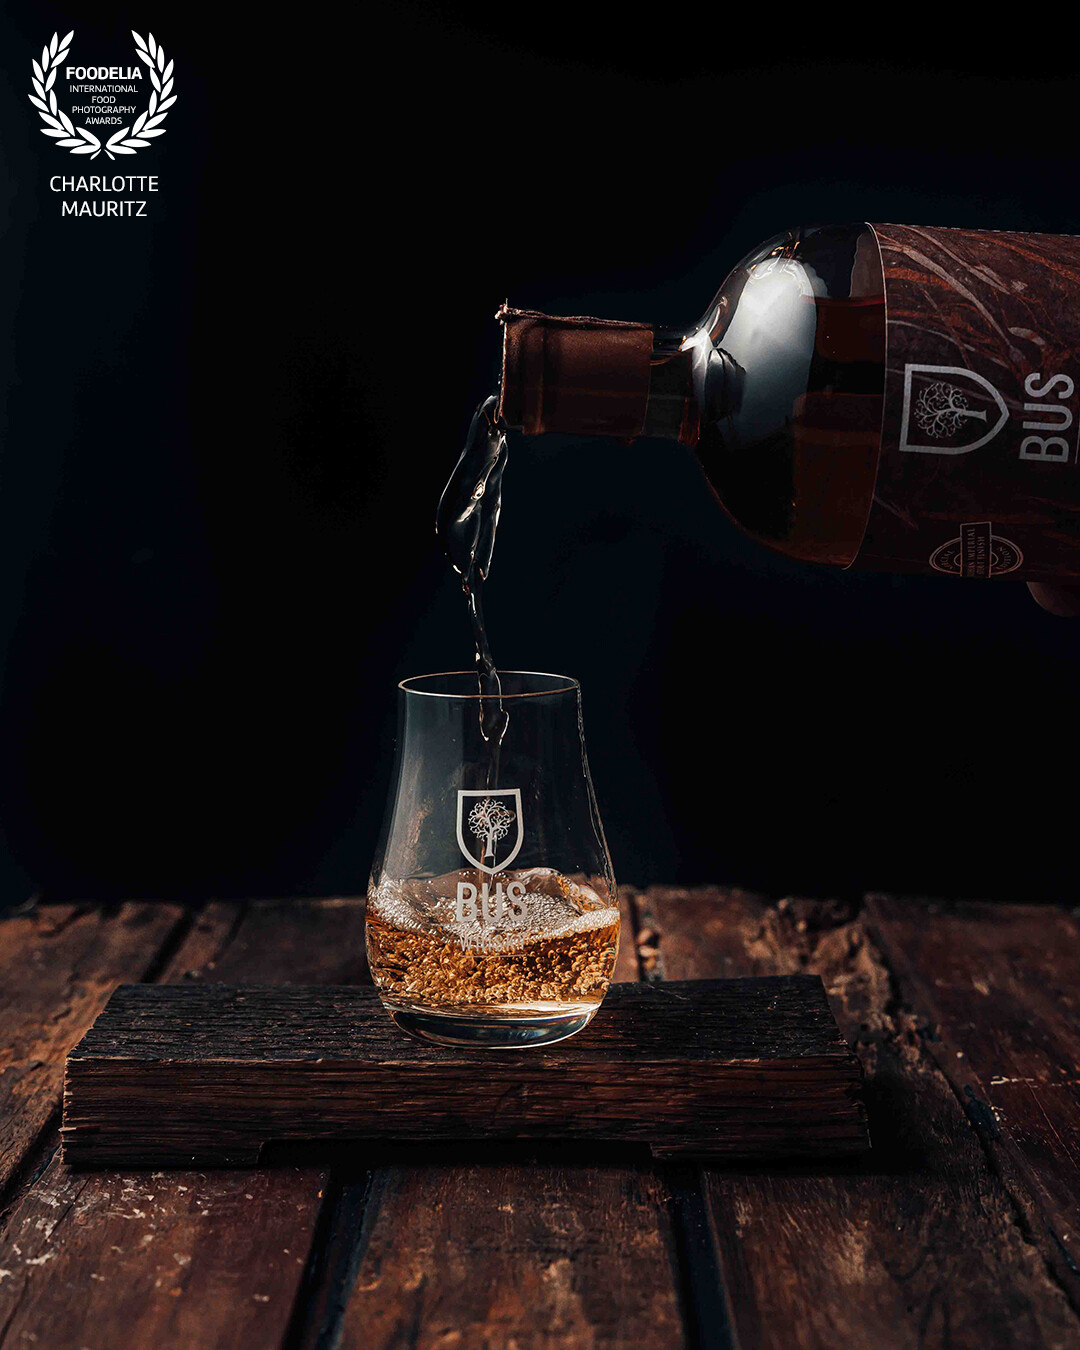 This picture I made for the biggest Dutch whisky brand Bus Whisky. They have a beautiful range of tasty whisky’s which are 100% Dutch.